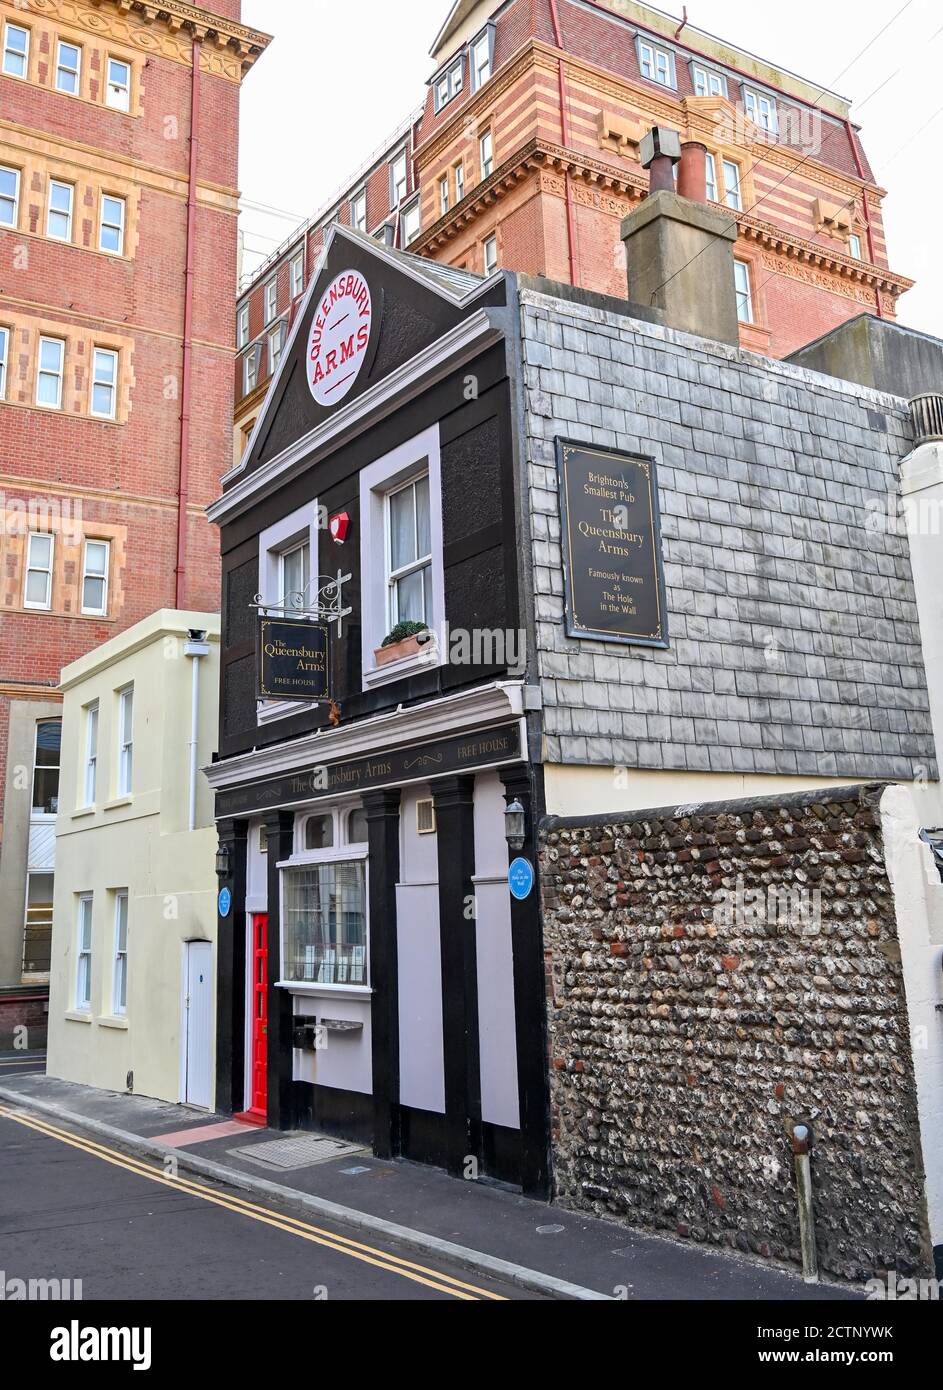 The Queensbury Arms formerly known as The Hole in the Wall is Brighton's smallest pub tucked behind the Metropole Hilton Hotel which is up for sale UK Stock Photo